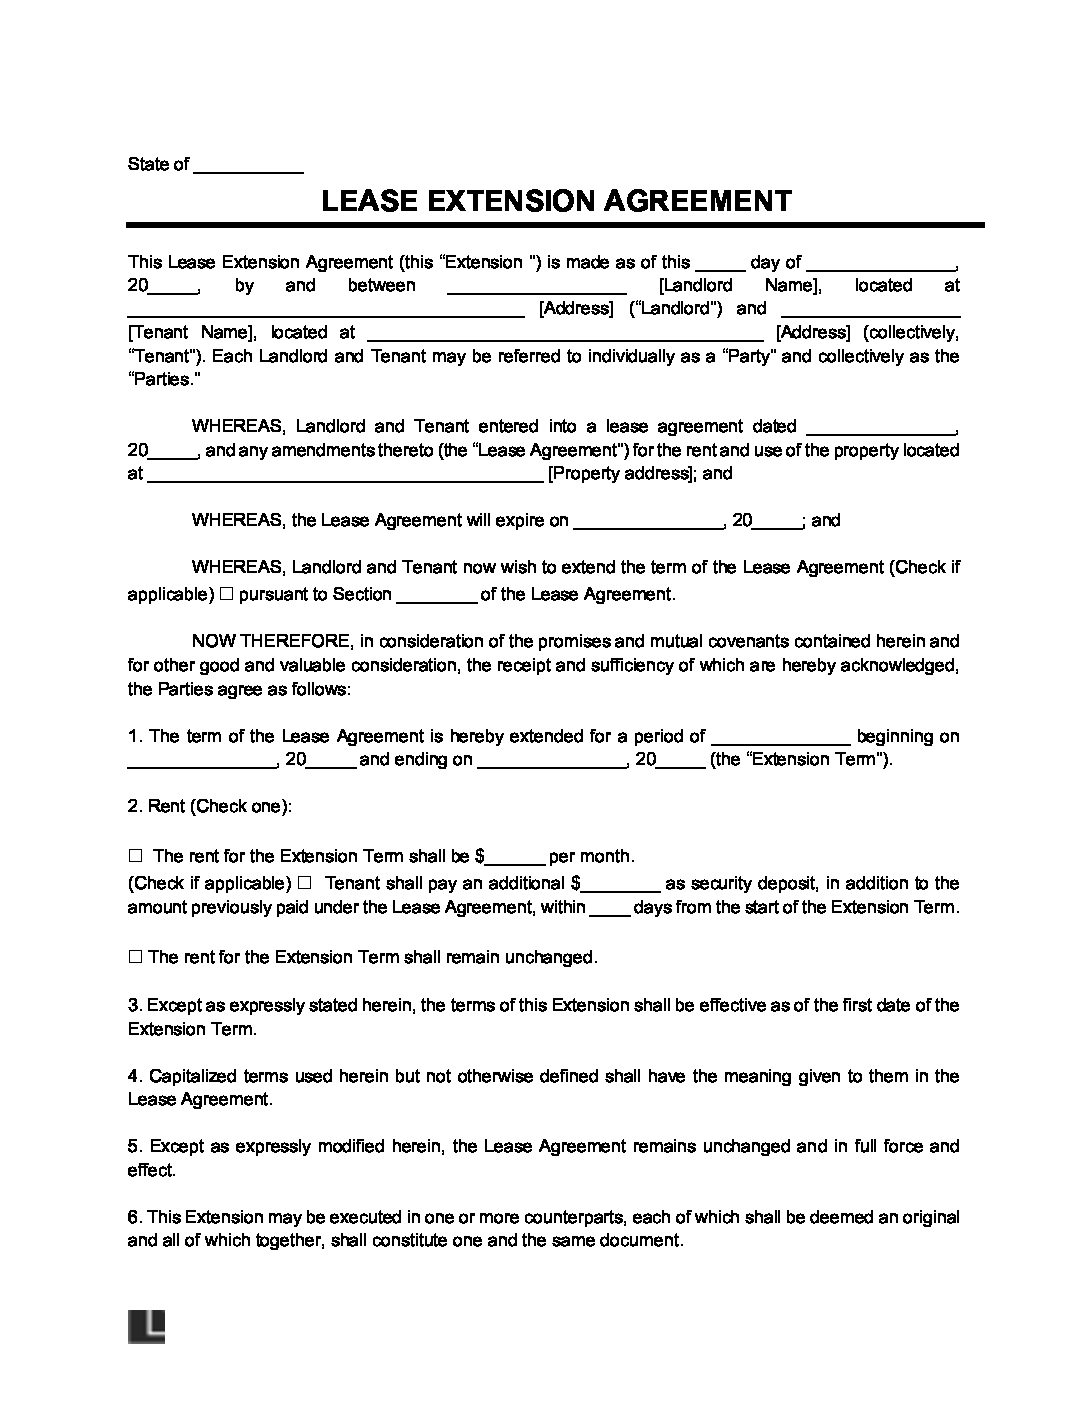 free lease extension agreement pdf ms word legal templates